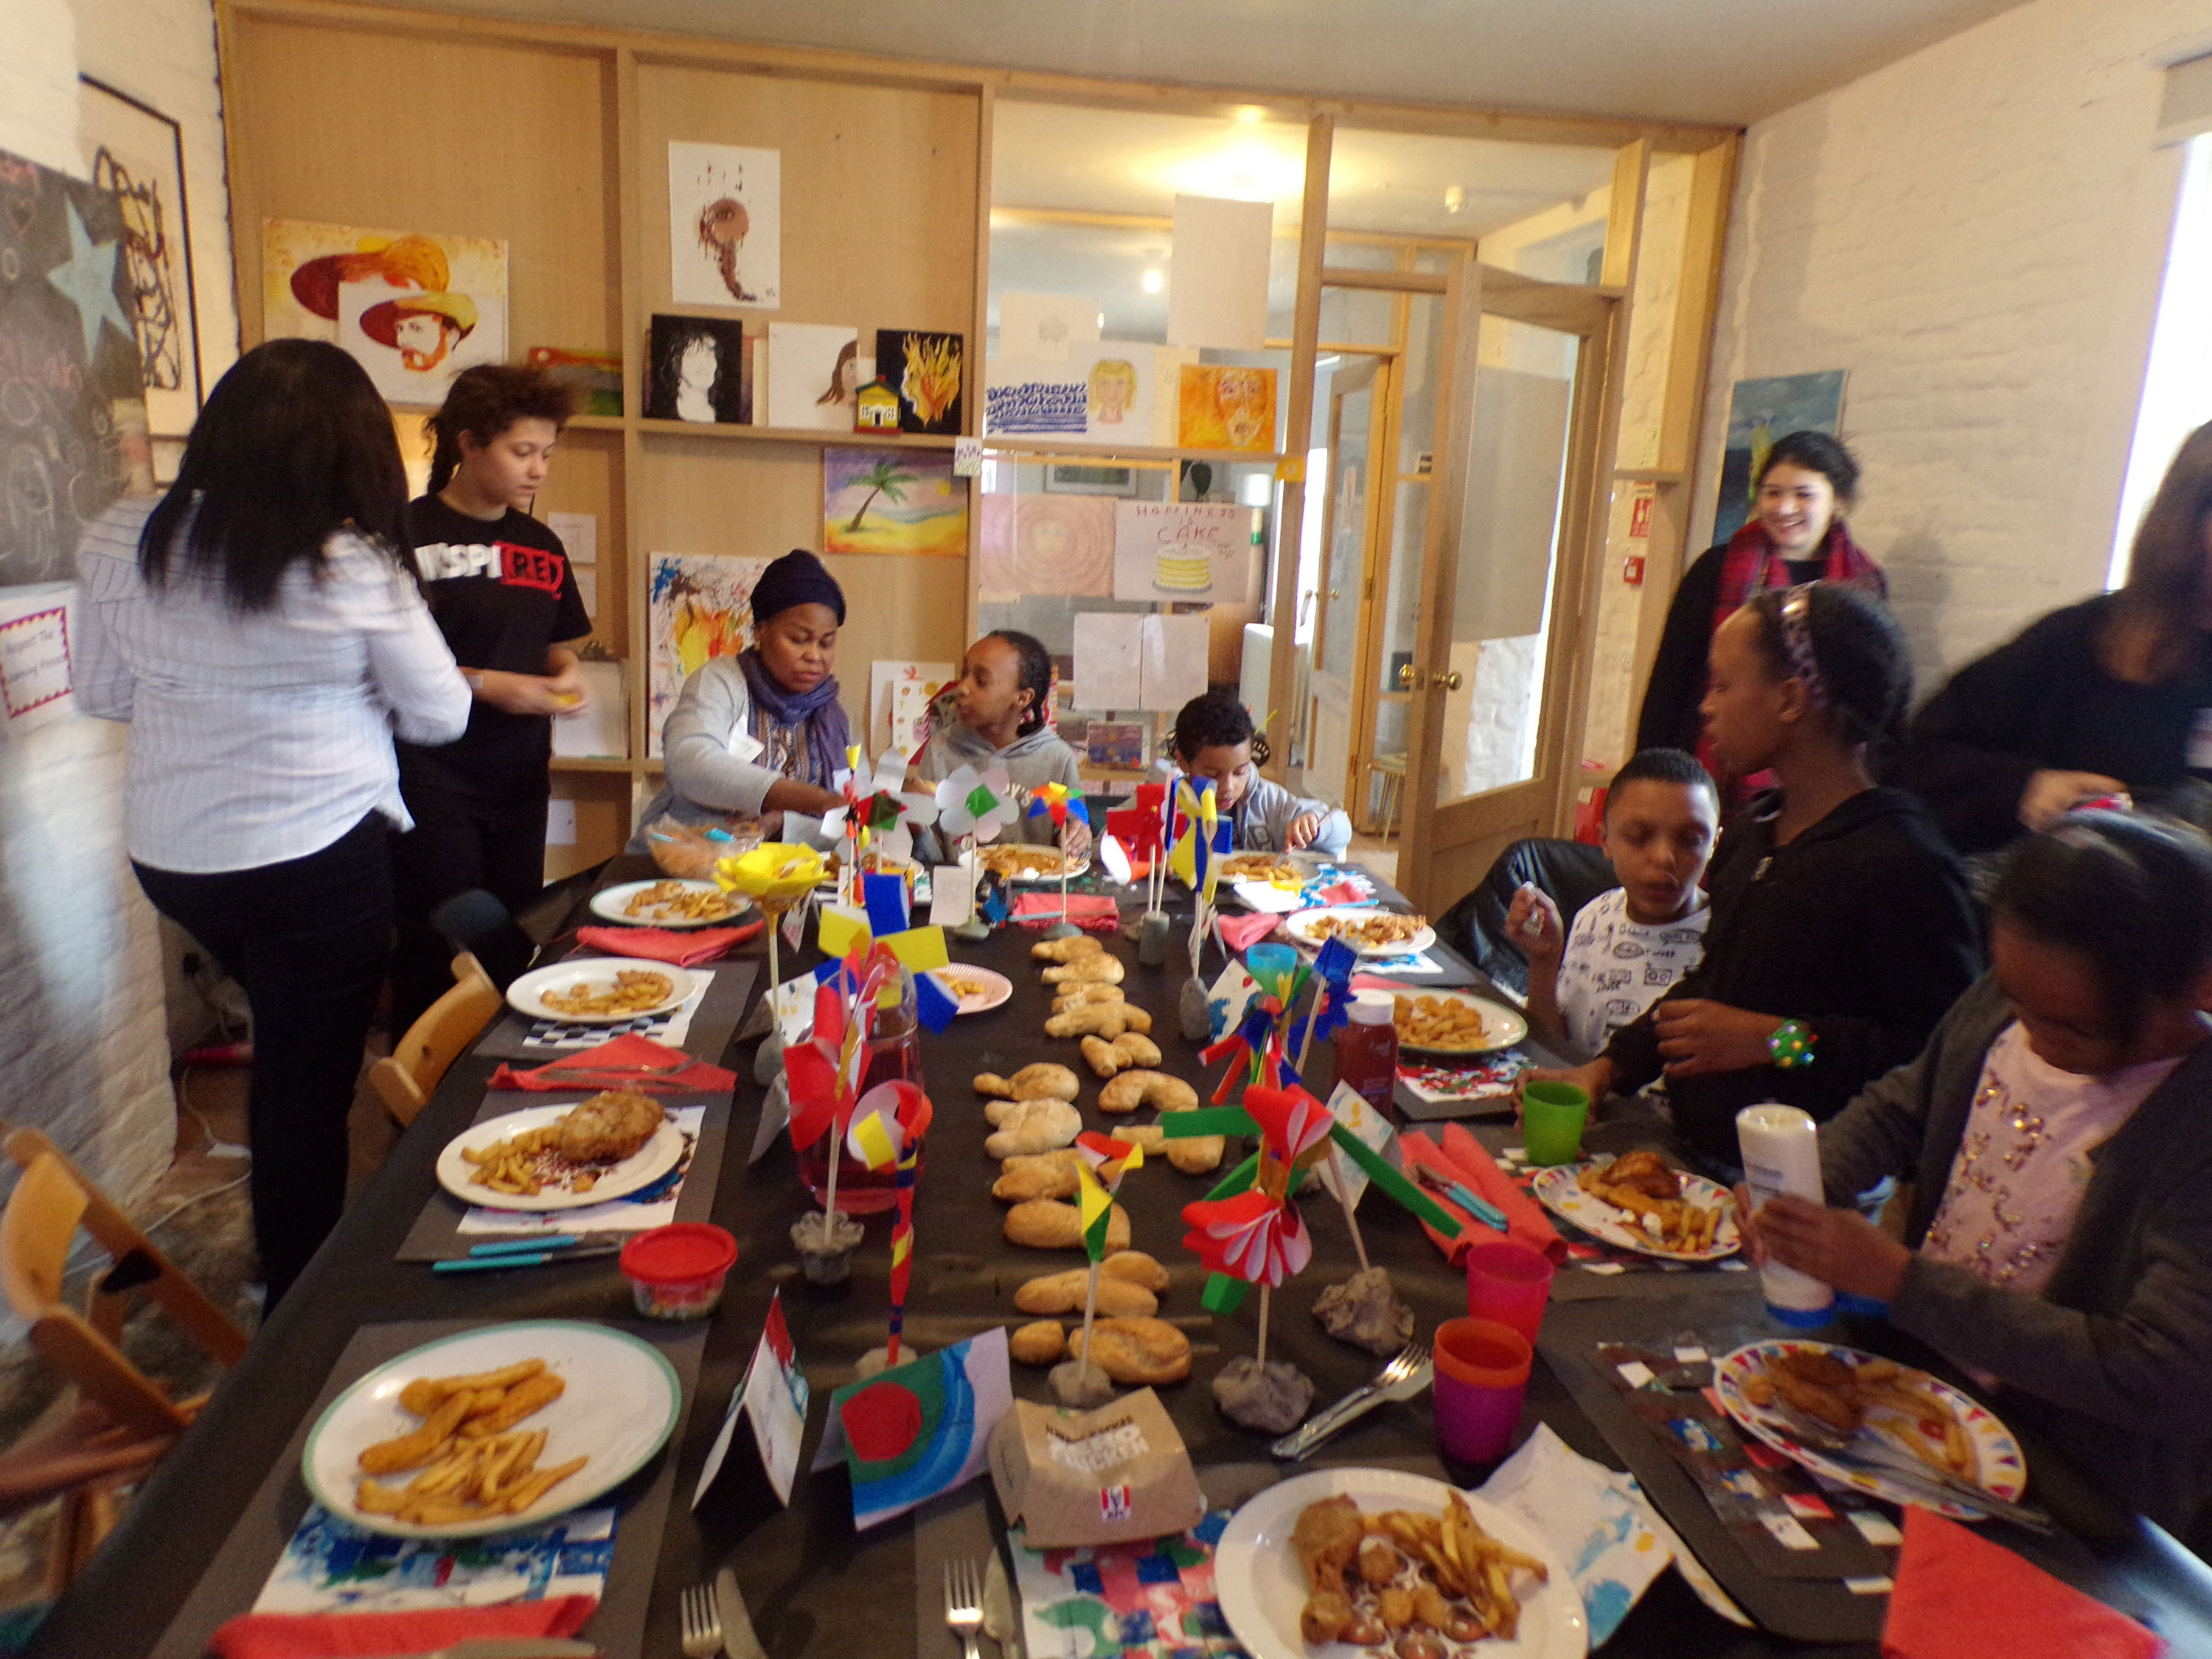 A group of participants gathered around a table decorated with party decorations and food